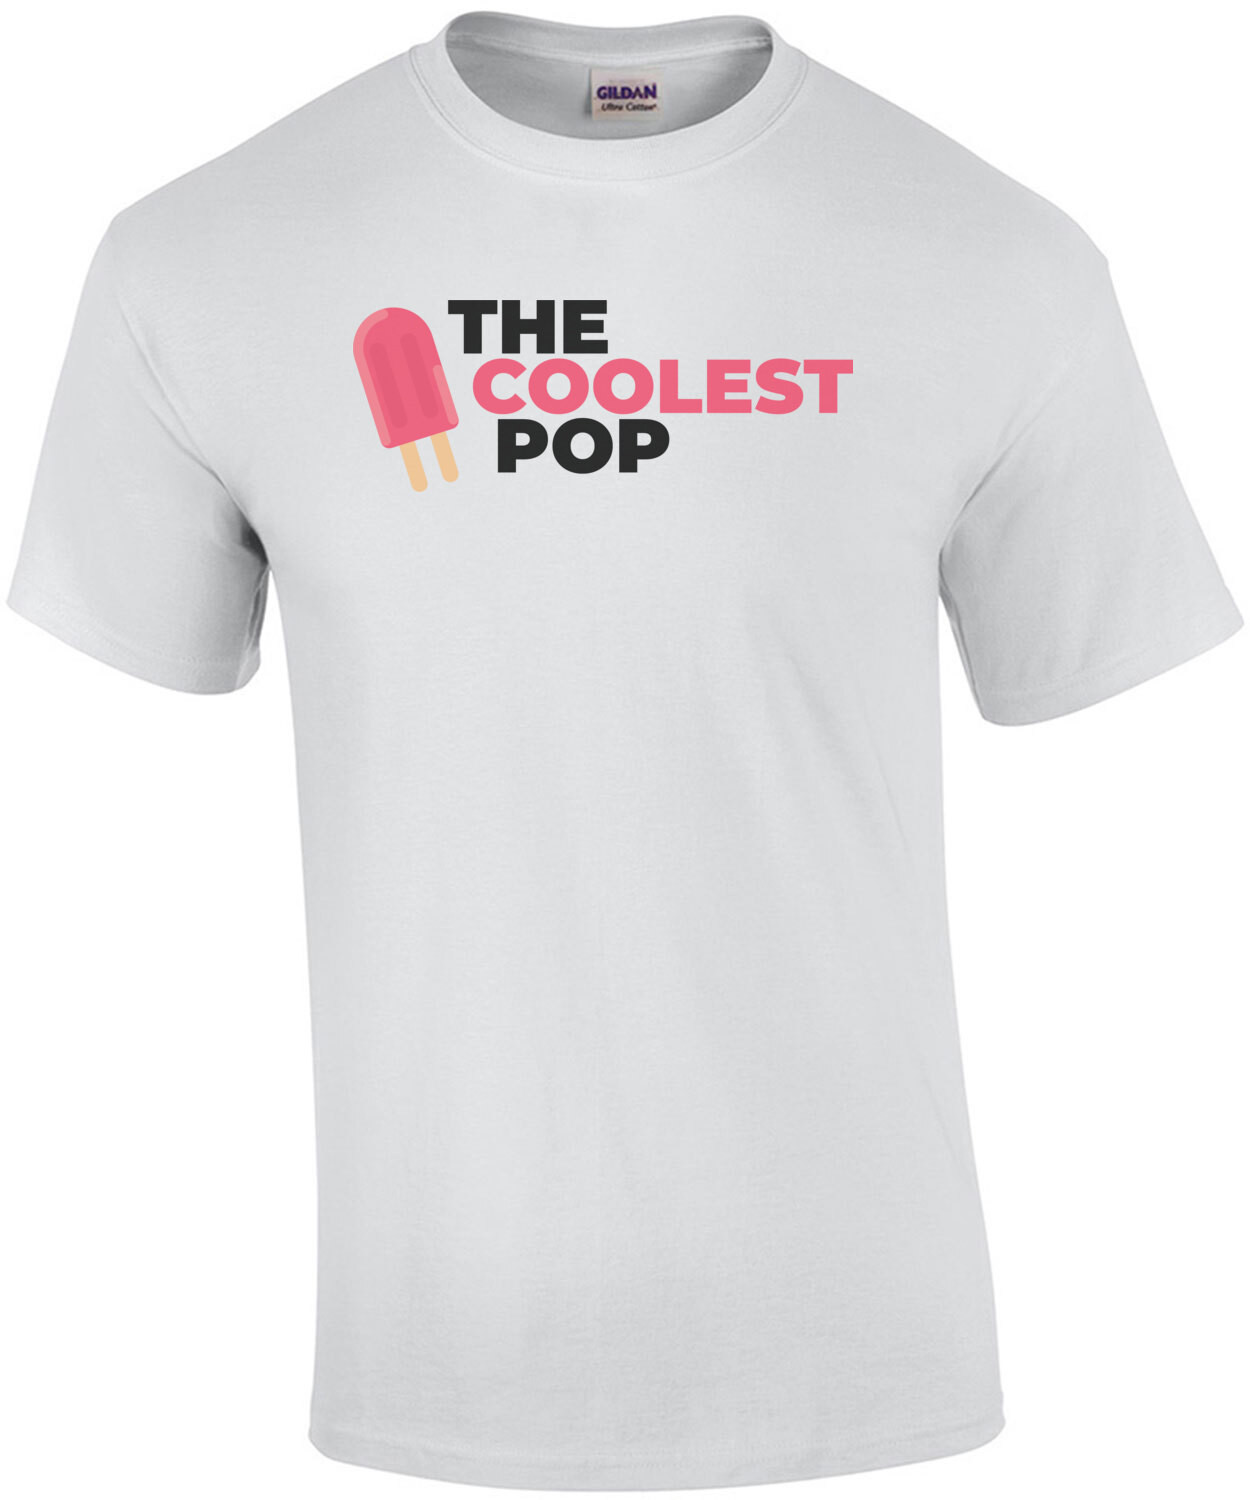 The coolest pop - father's day t-shirt - dad t-shirt